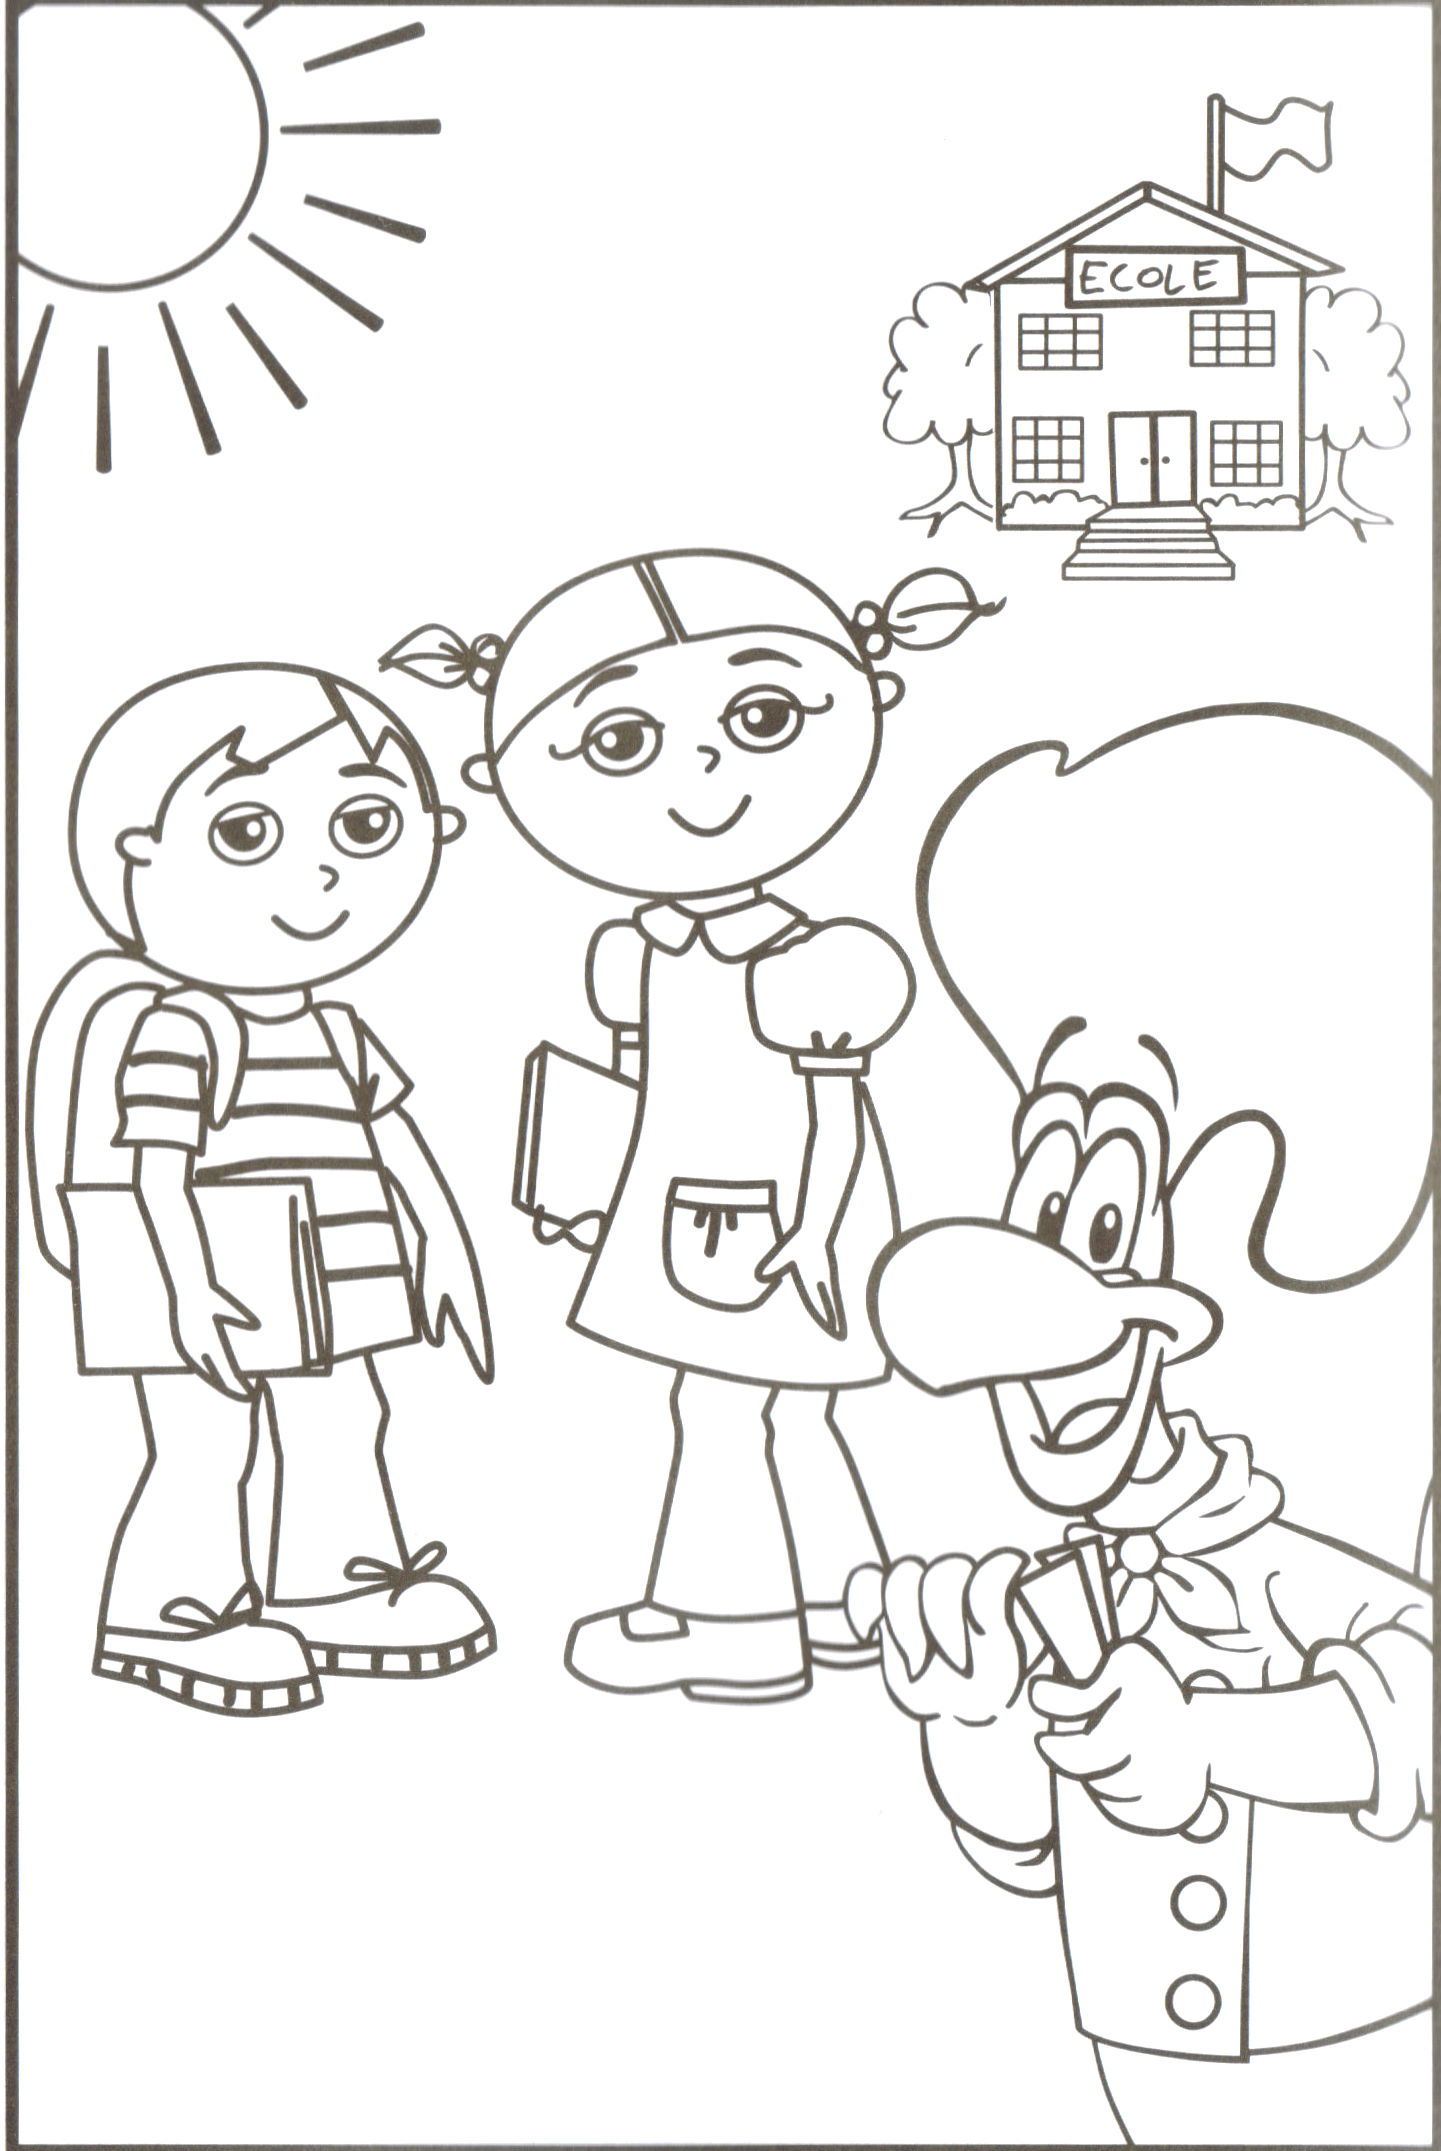 Say No To Drugs Coloring Pages at GetDrawings | Free download